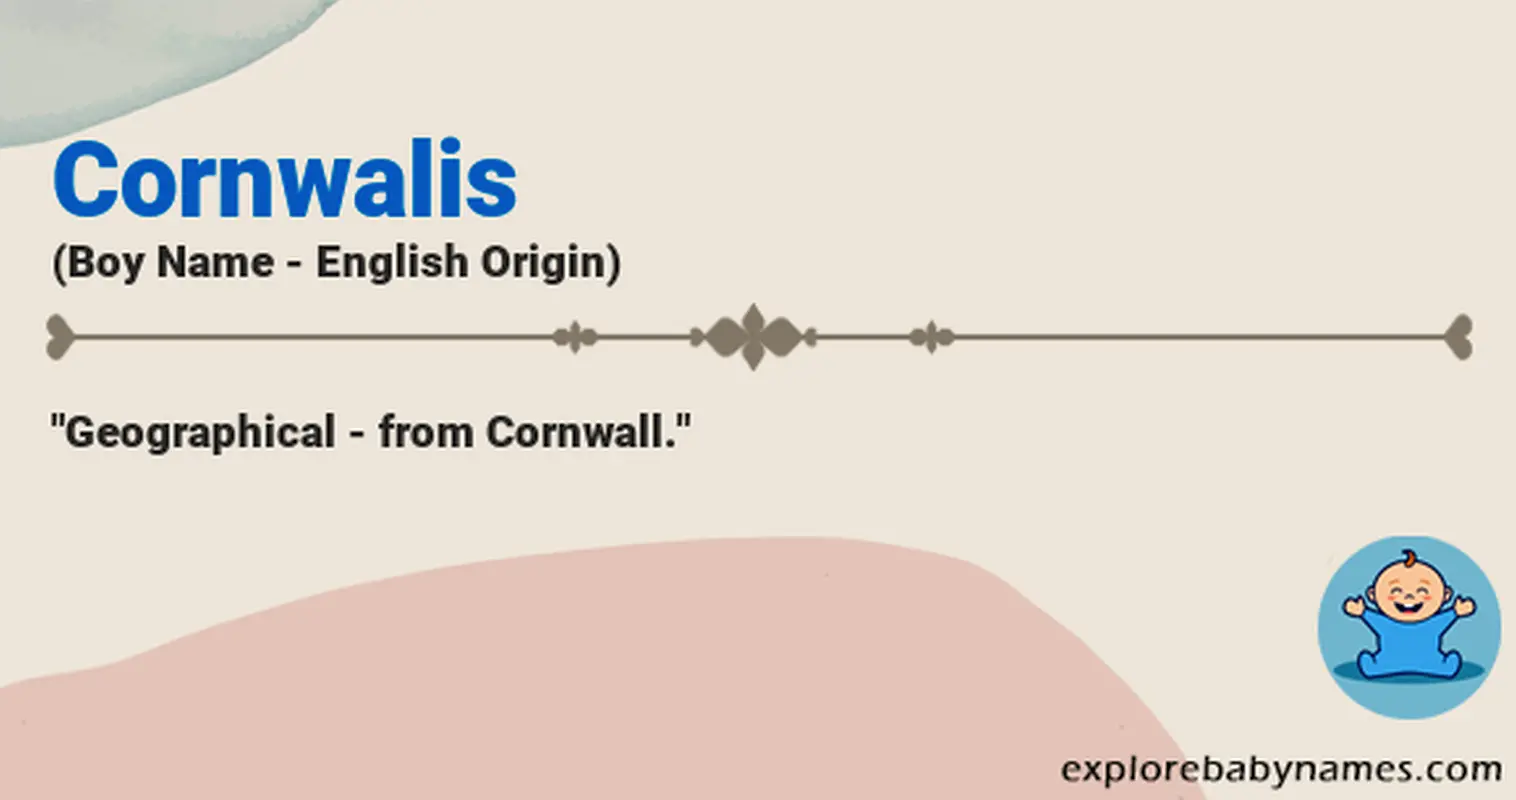 Meaning of Cornwalis